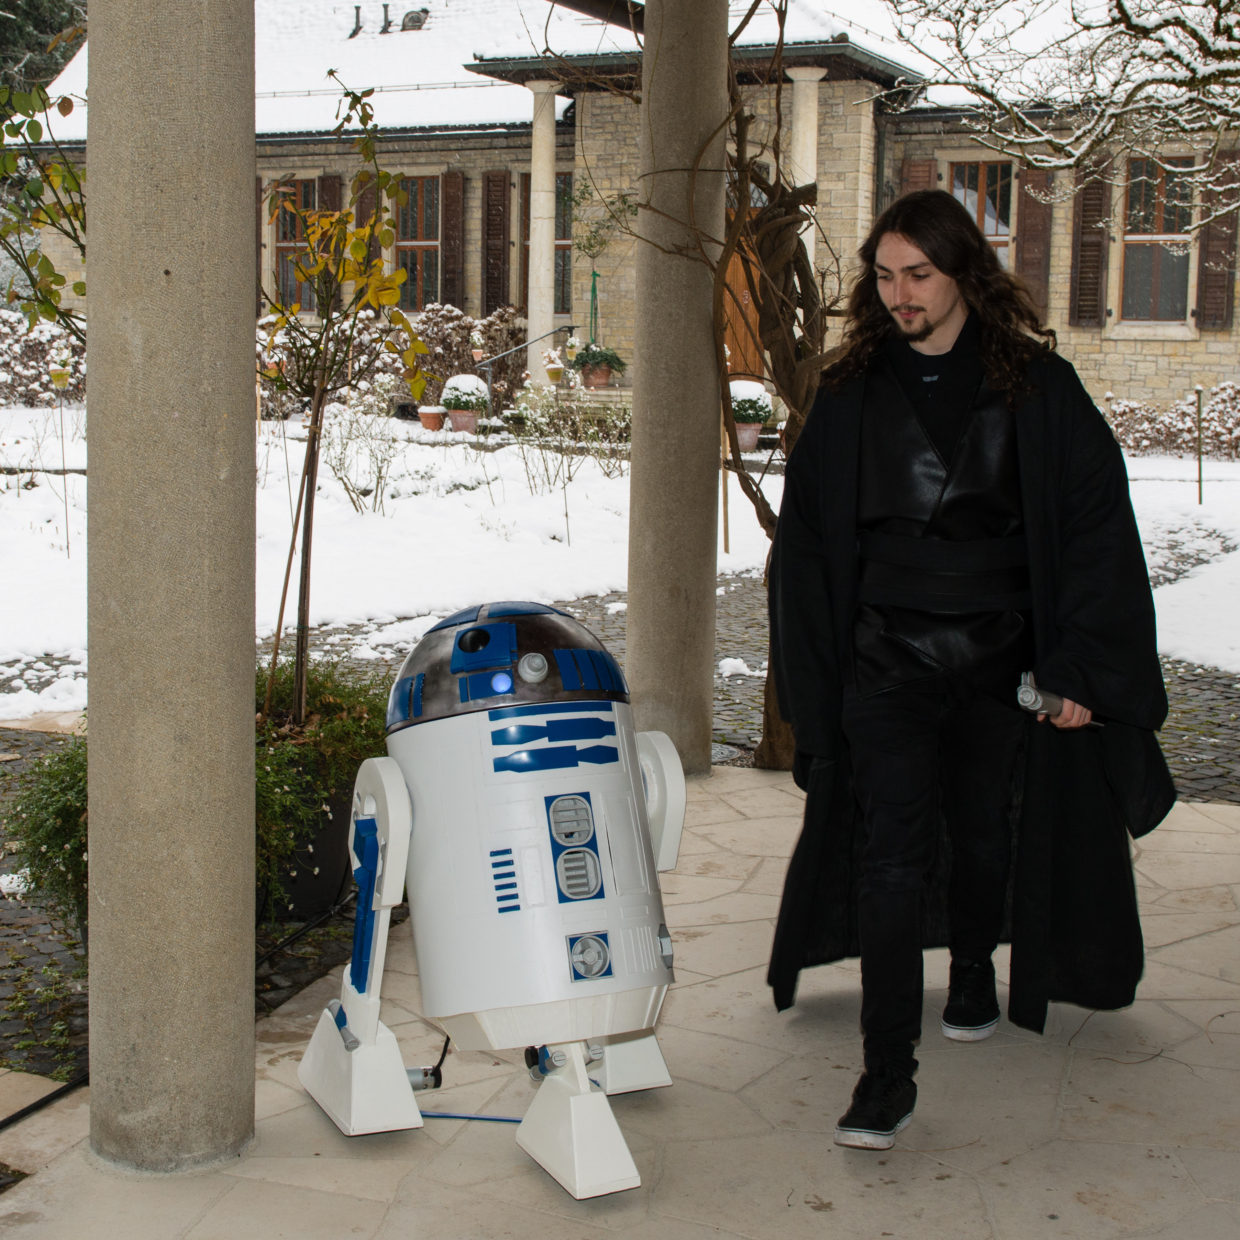 R2D2 with me